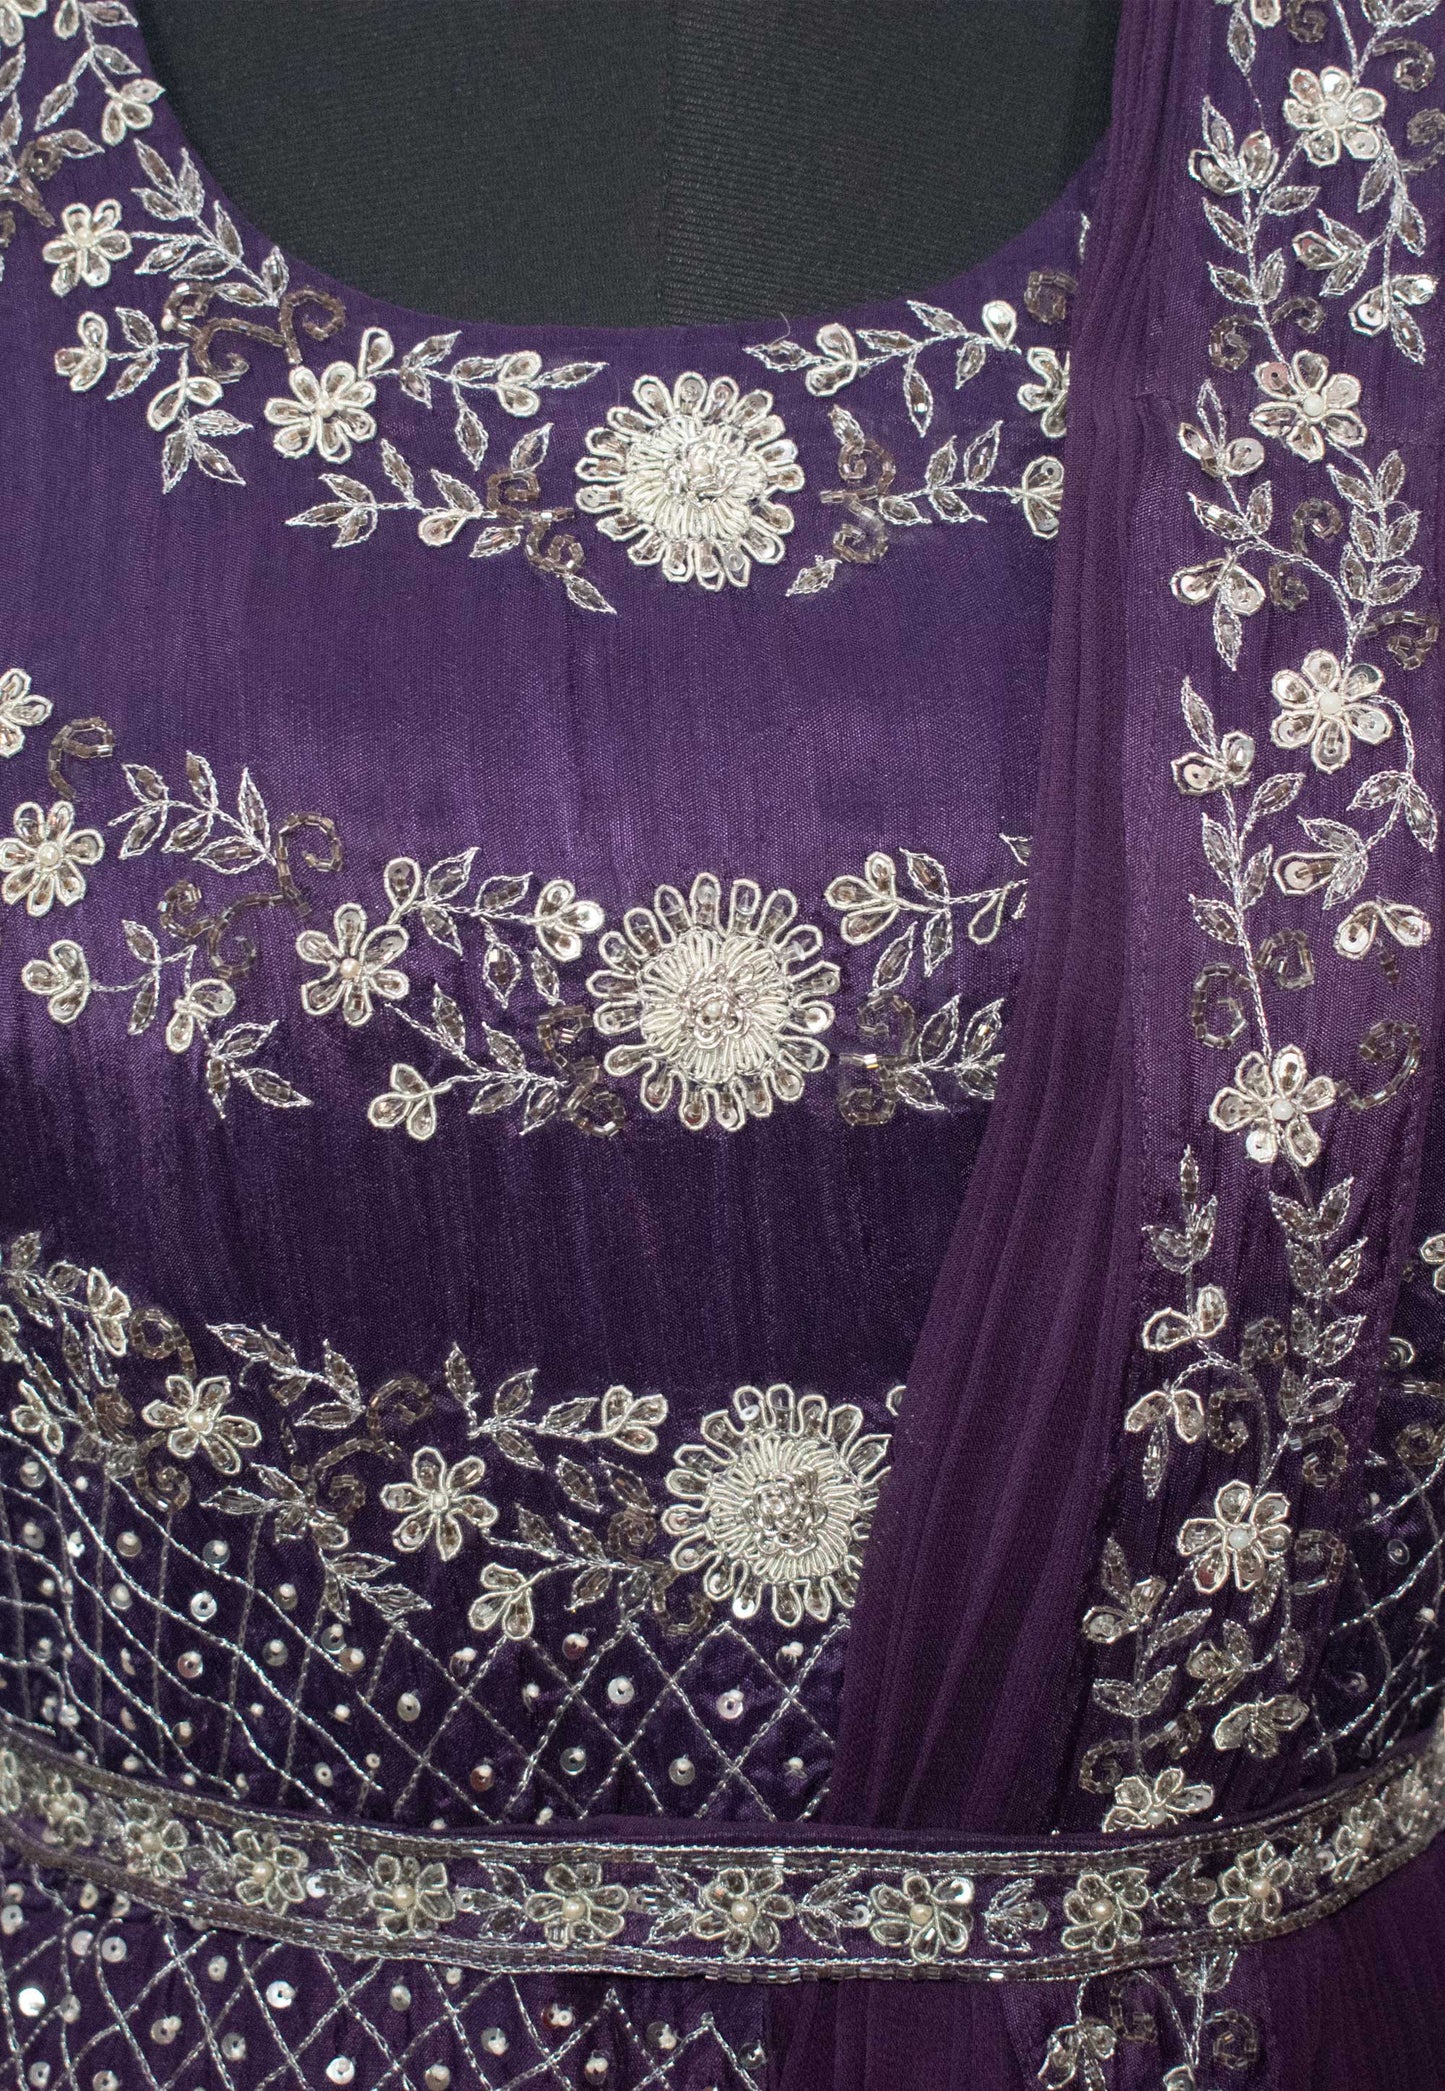 Hand Embroidered Georgette Gown in Purple